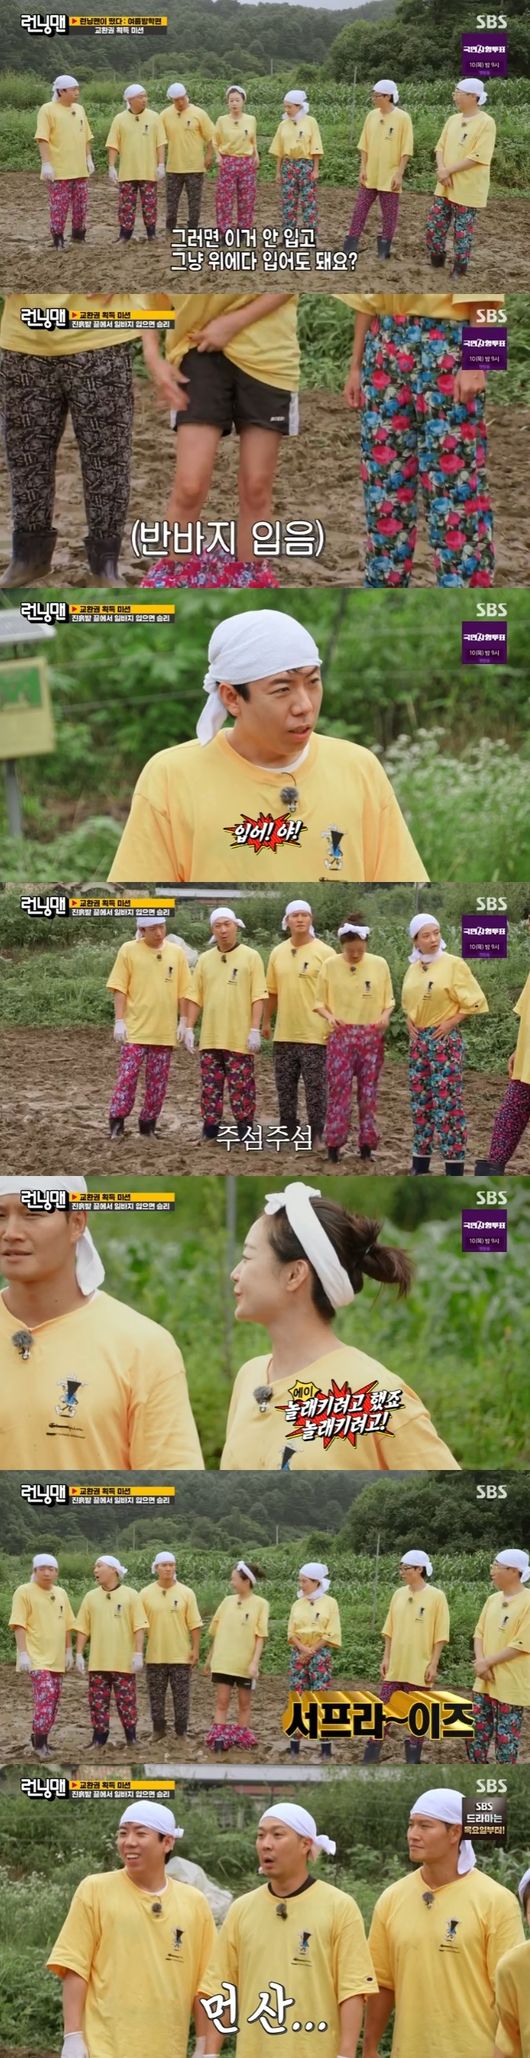 Running Man Jeon So-min shocked the cast with an unexpected moveSBS Running Man broadcasted on the 30th was packed as a summer vacation special.On this day, members carried out a mission with a right of exchange to receive a gilt-bronze of 3 million won.The members who finished the first discount field work and the making of the new one went to the muddy changeover mission which can receive the additional right of exchange. The rule is to run on the mud and win by wearing the Trousers first.However, the puddle in the middle must jump and avoid or step on it unconditionally, and it was only successful if you were wearing boots at the final arrival.Yang Se-chan asked, Is it over if I lose my boots? And Jeon So-min suddenly surprised everyone by saying, Can I wear it on top of it?Yang Se-chan was horrified, saying, Its a surprise! while Jeon So-min urgently clarified, Im wearing Trousers. Yang Se-chan then yelled, Get dressed! Hey!Yoo Jae-Suk, who watched this, said, It is because Minmin learns the arts with friends like us. Haha said, Think if you do not wear it.Jeon So-min said, I tried to surprise you. I tried to get your reaction. I was wearing anti-Trousers.Yang Se-chan said, I want to do it because I do not want to do it, but I am a panty.SBS